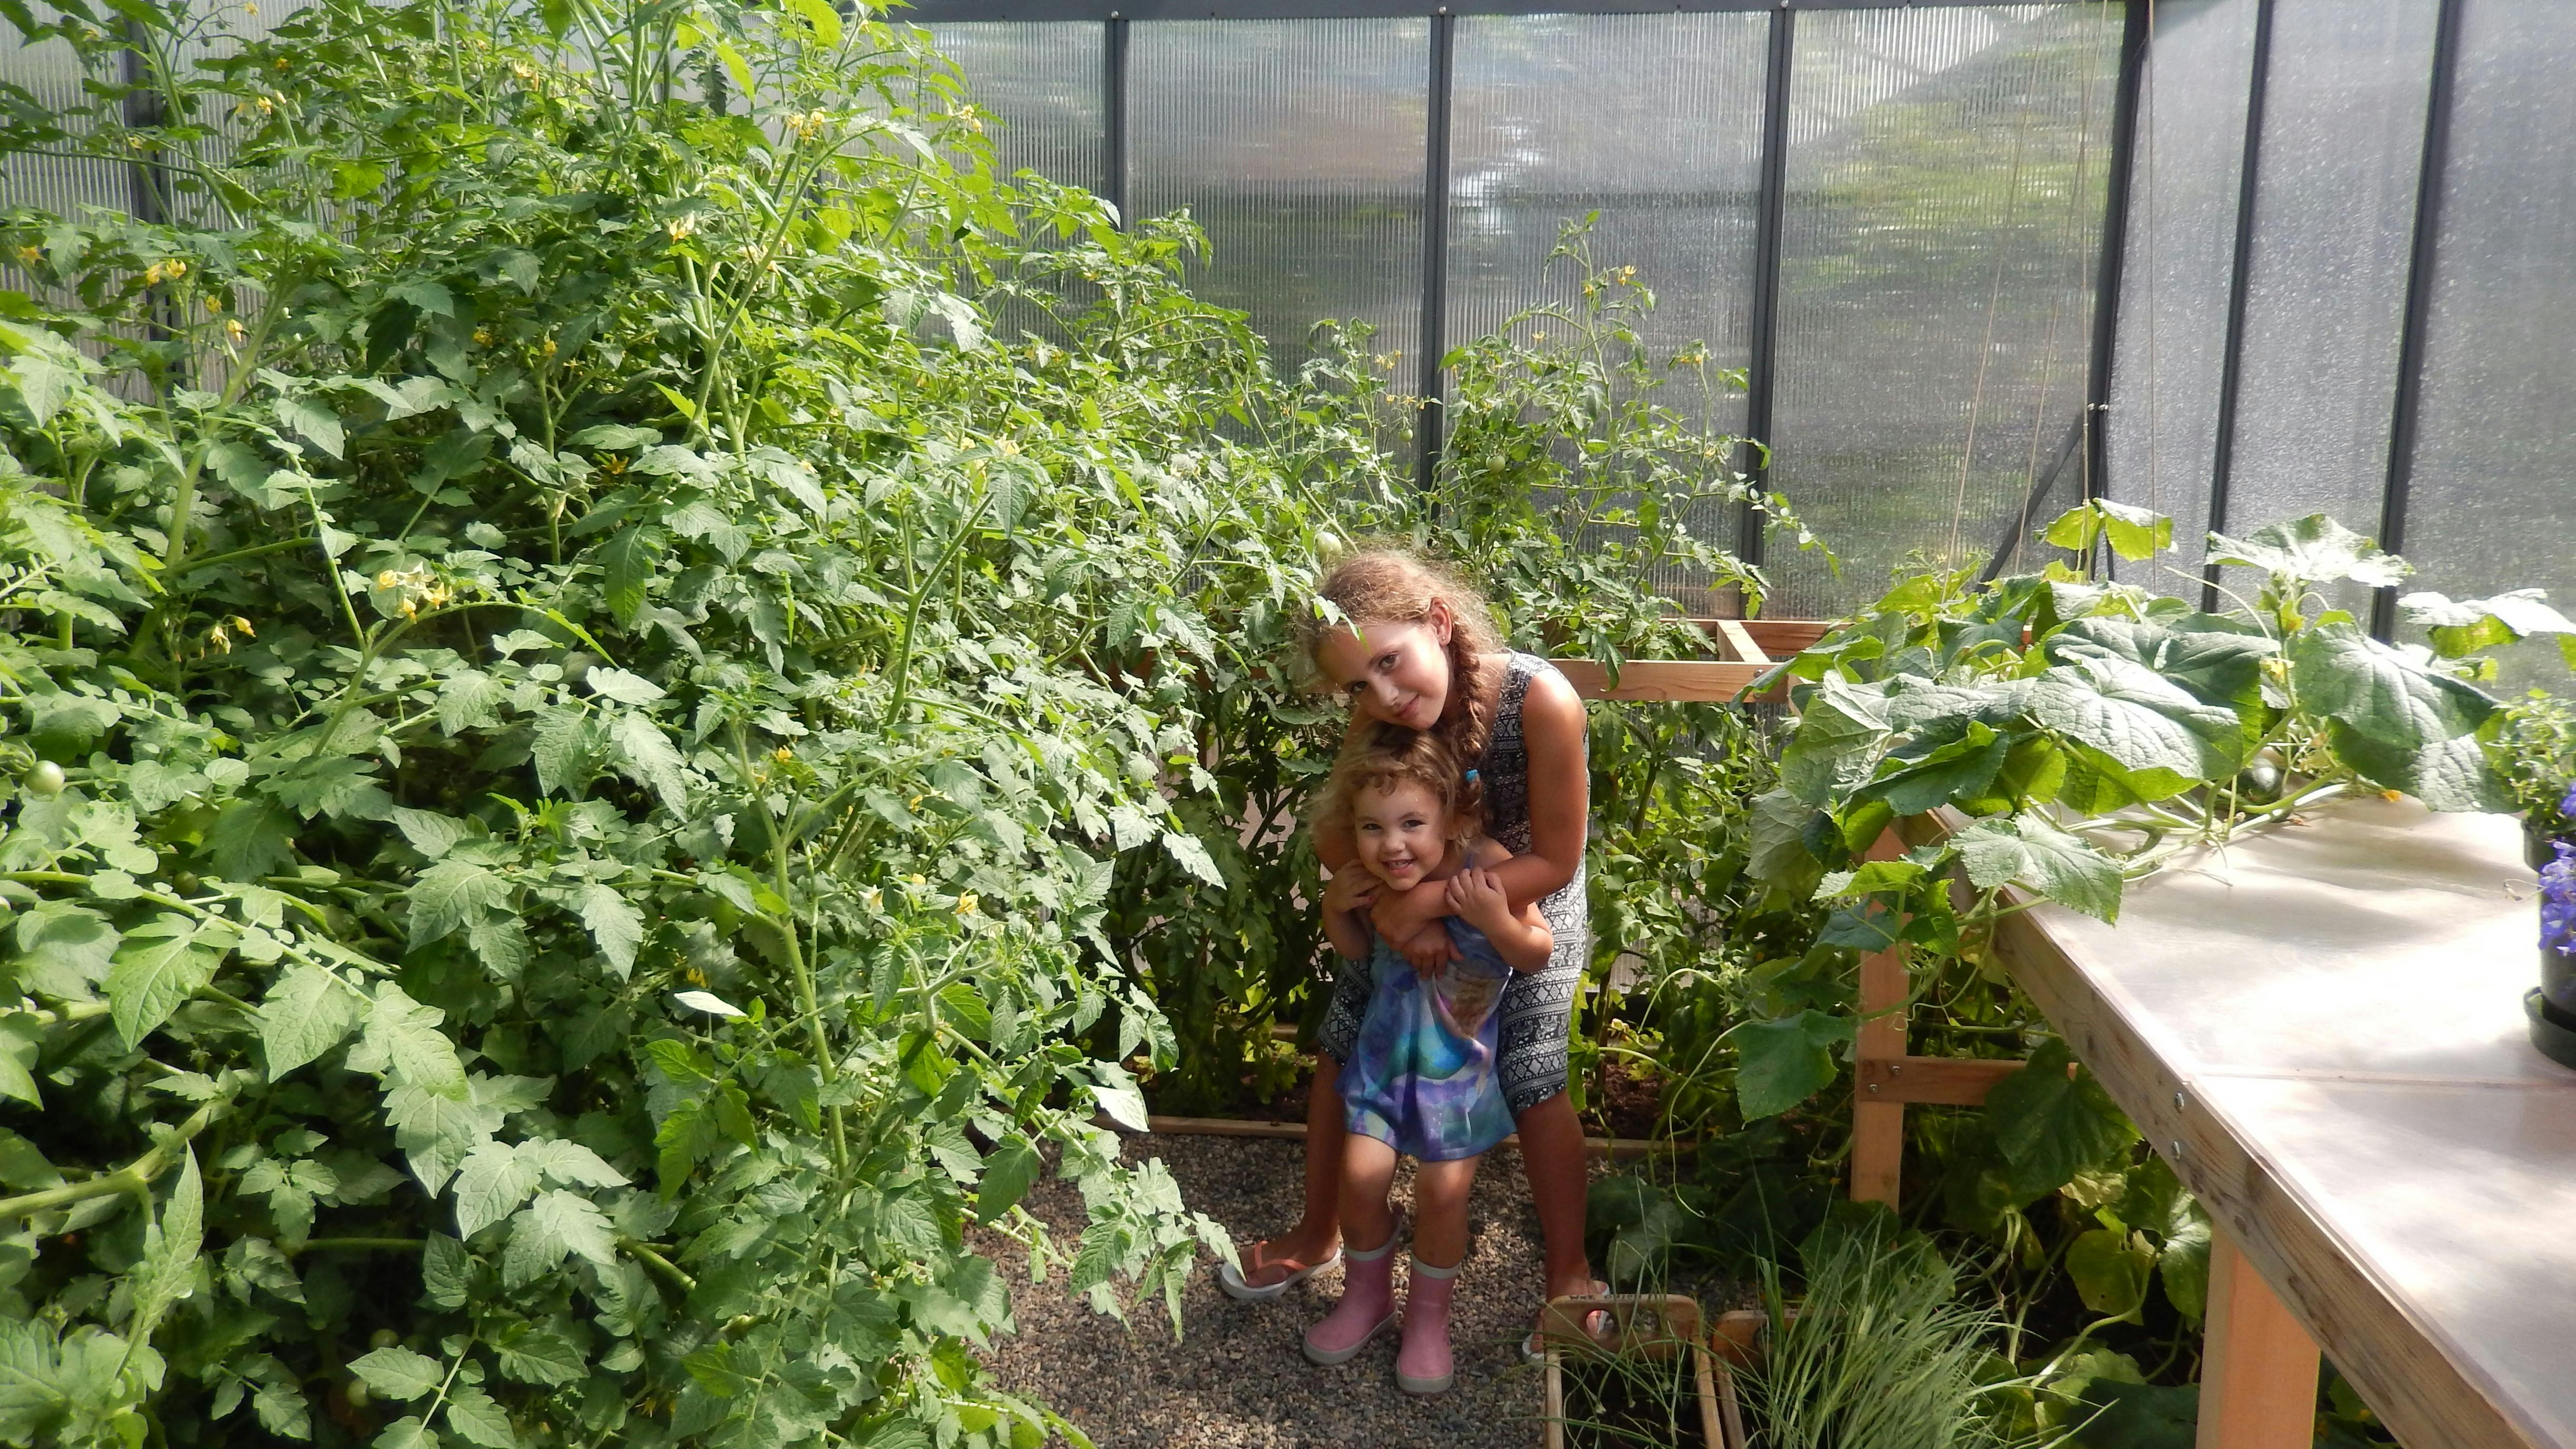 "Our first time greenhouse and the tomatoes were humungous!"